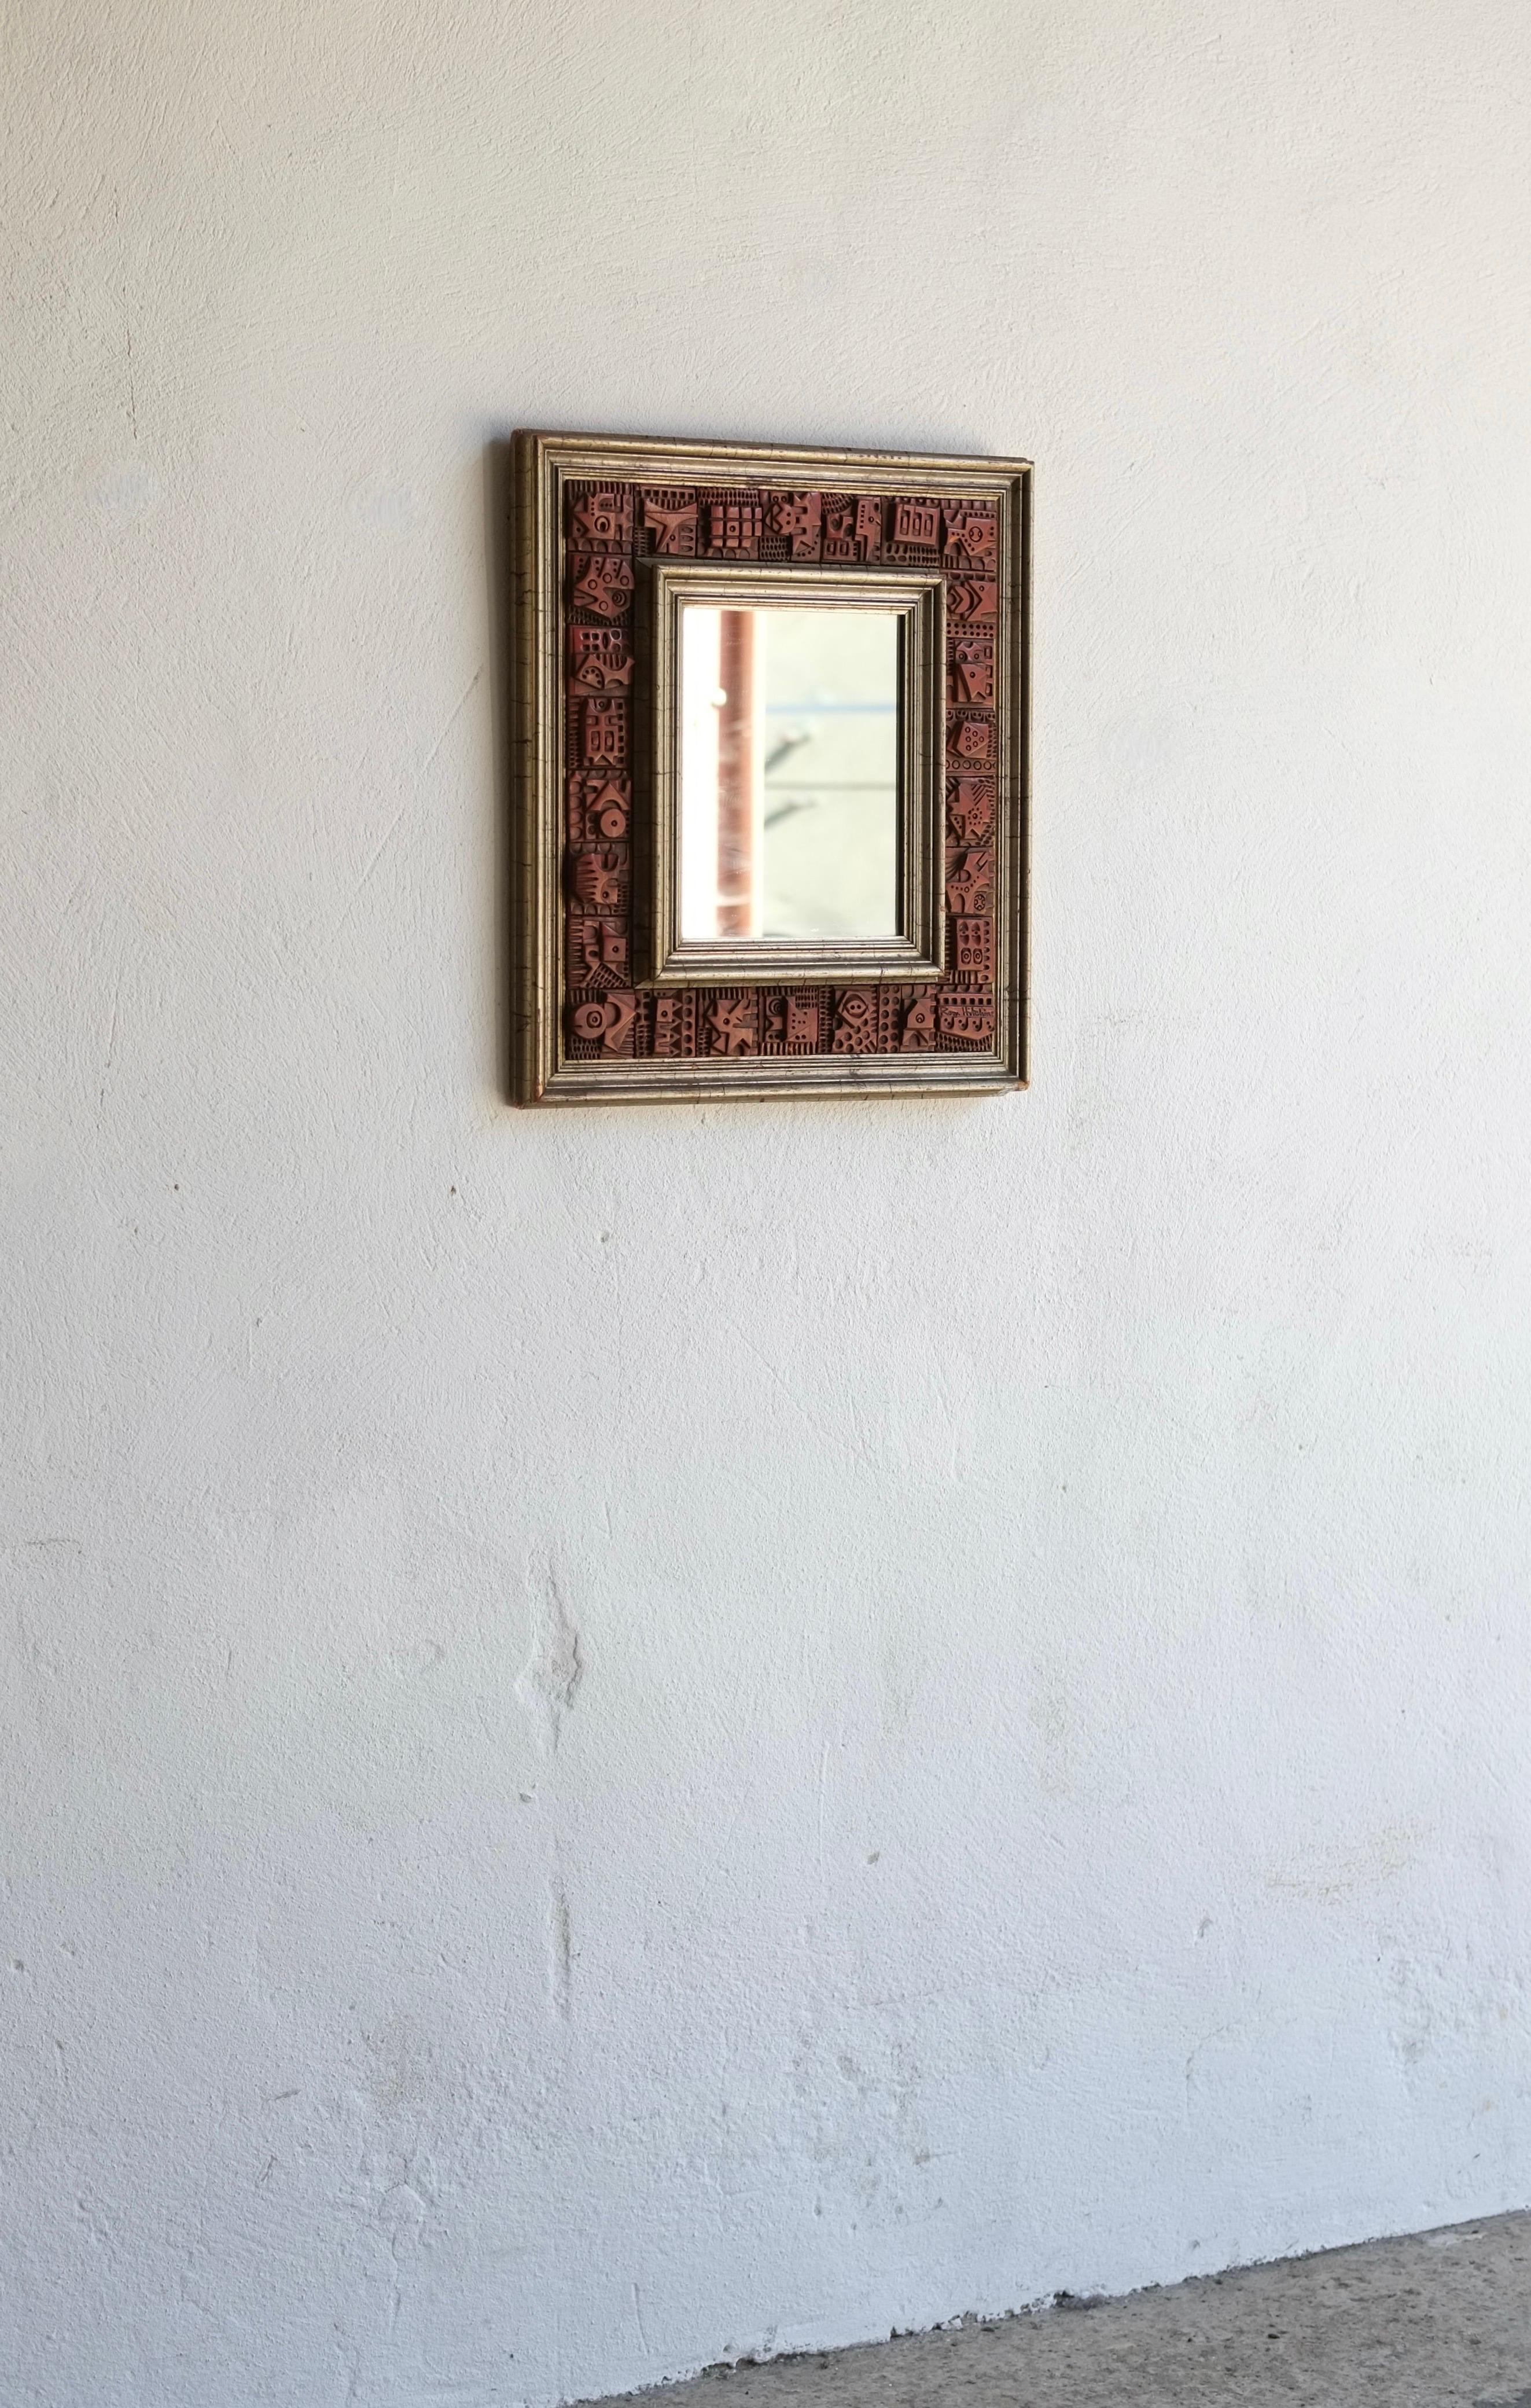 Tiled Wall Mirror, Ron Hitchins 1